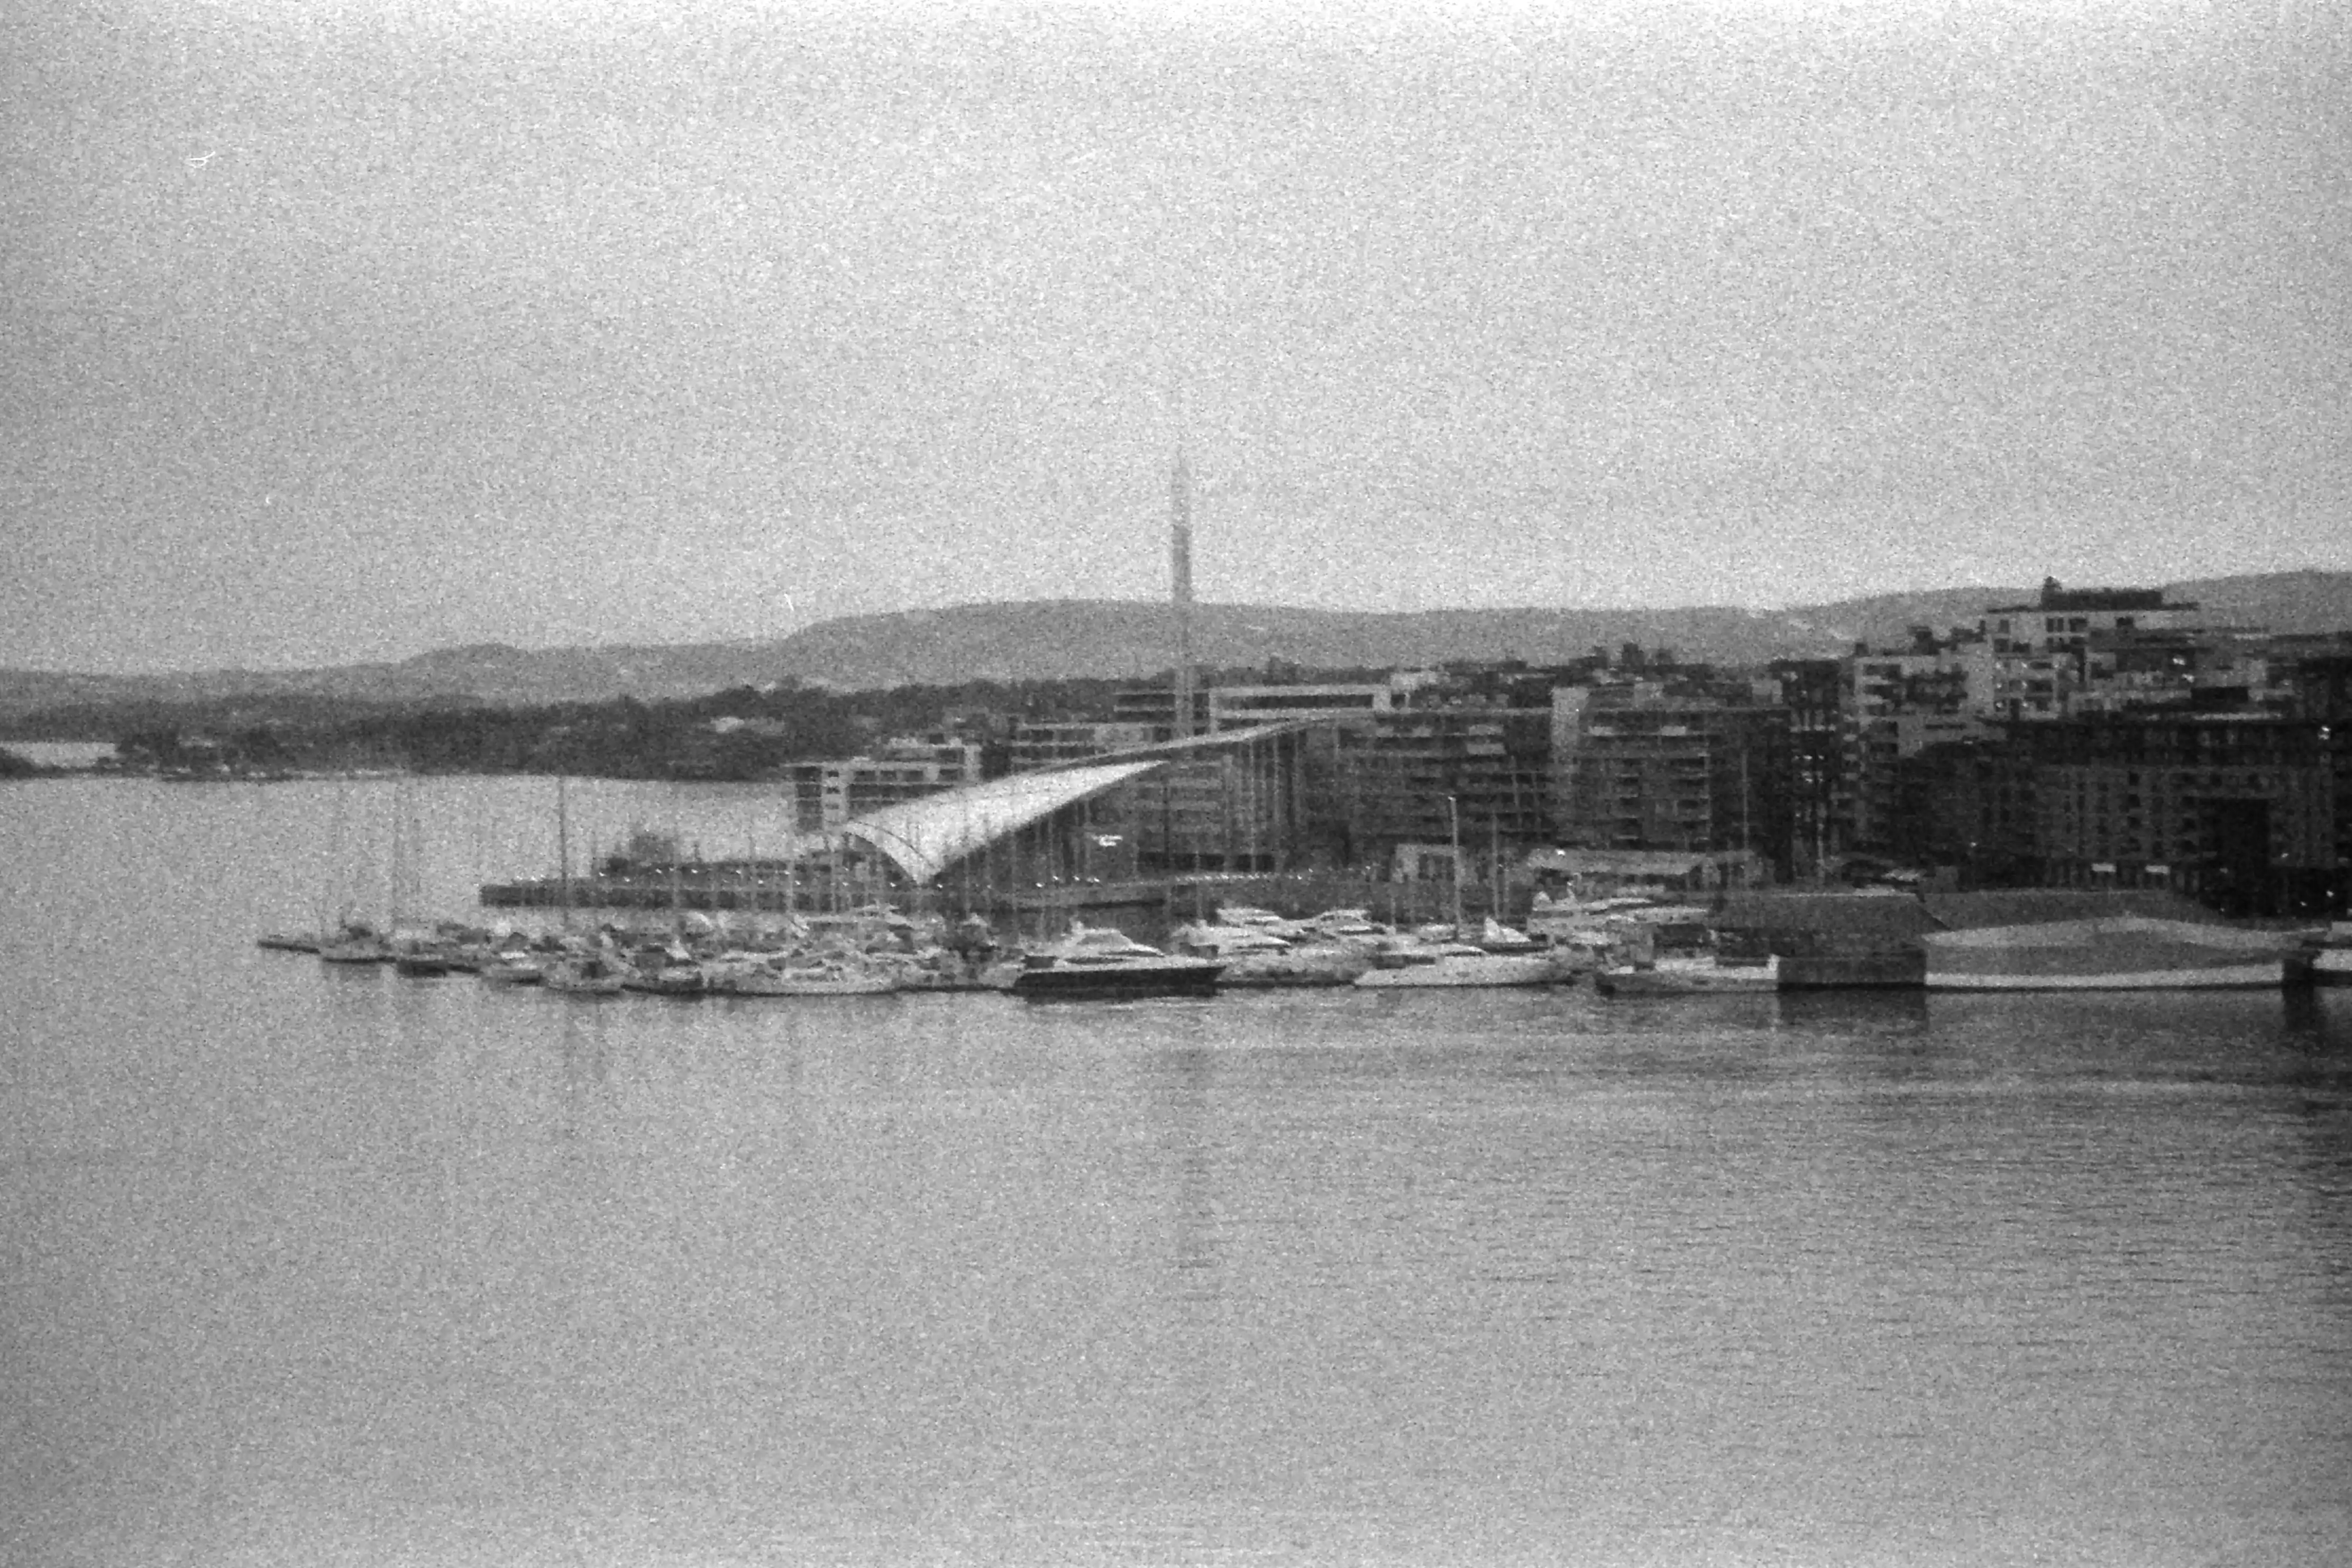 Black and white picture of Oslo’s coast featuring some boats and buldings